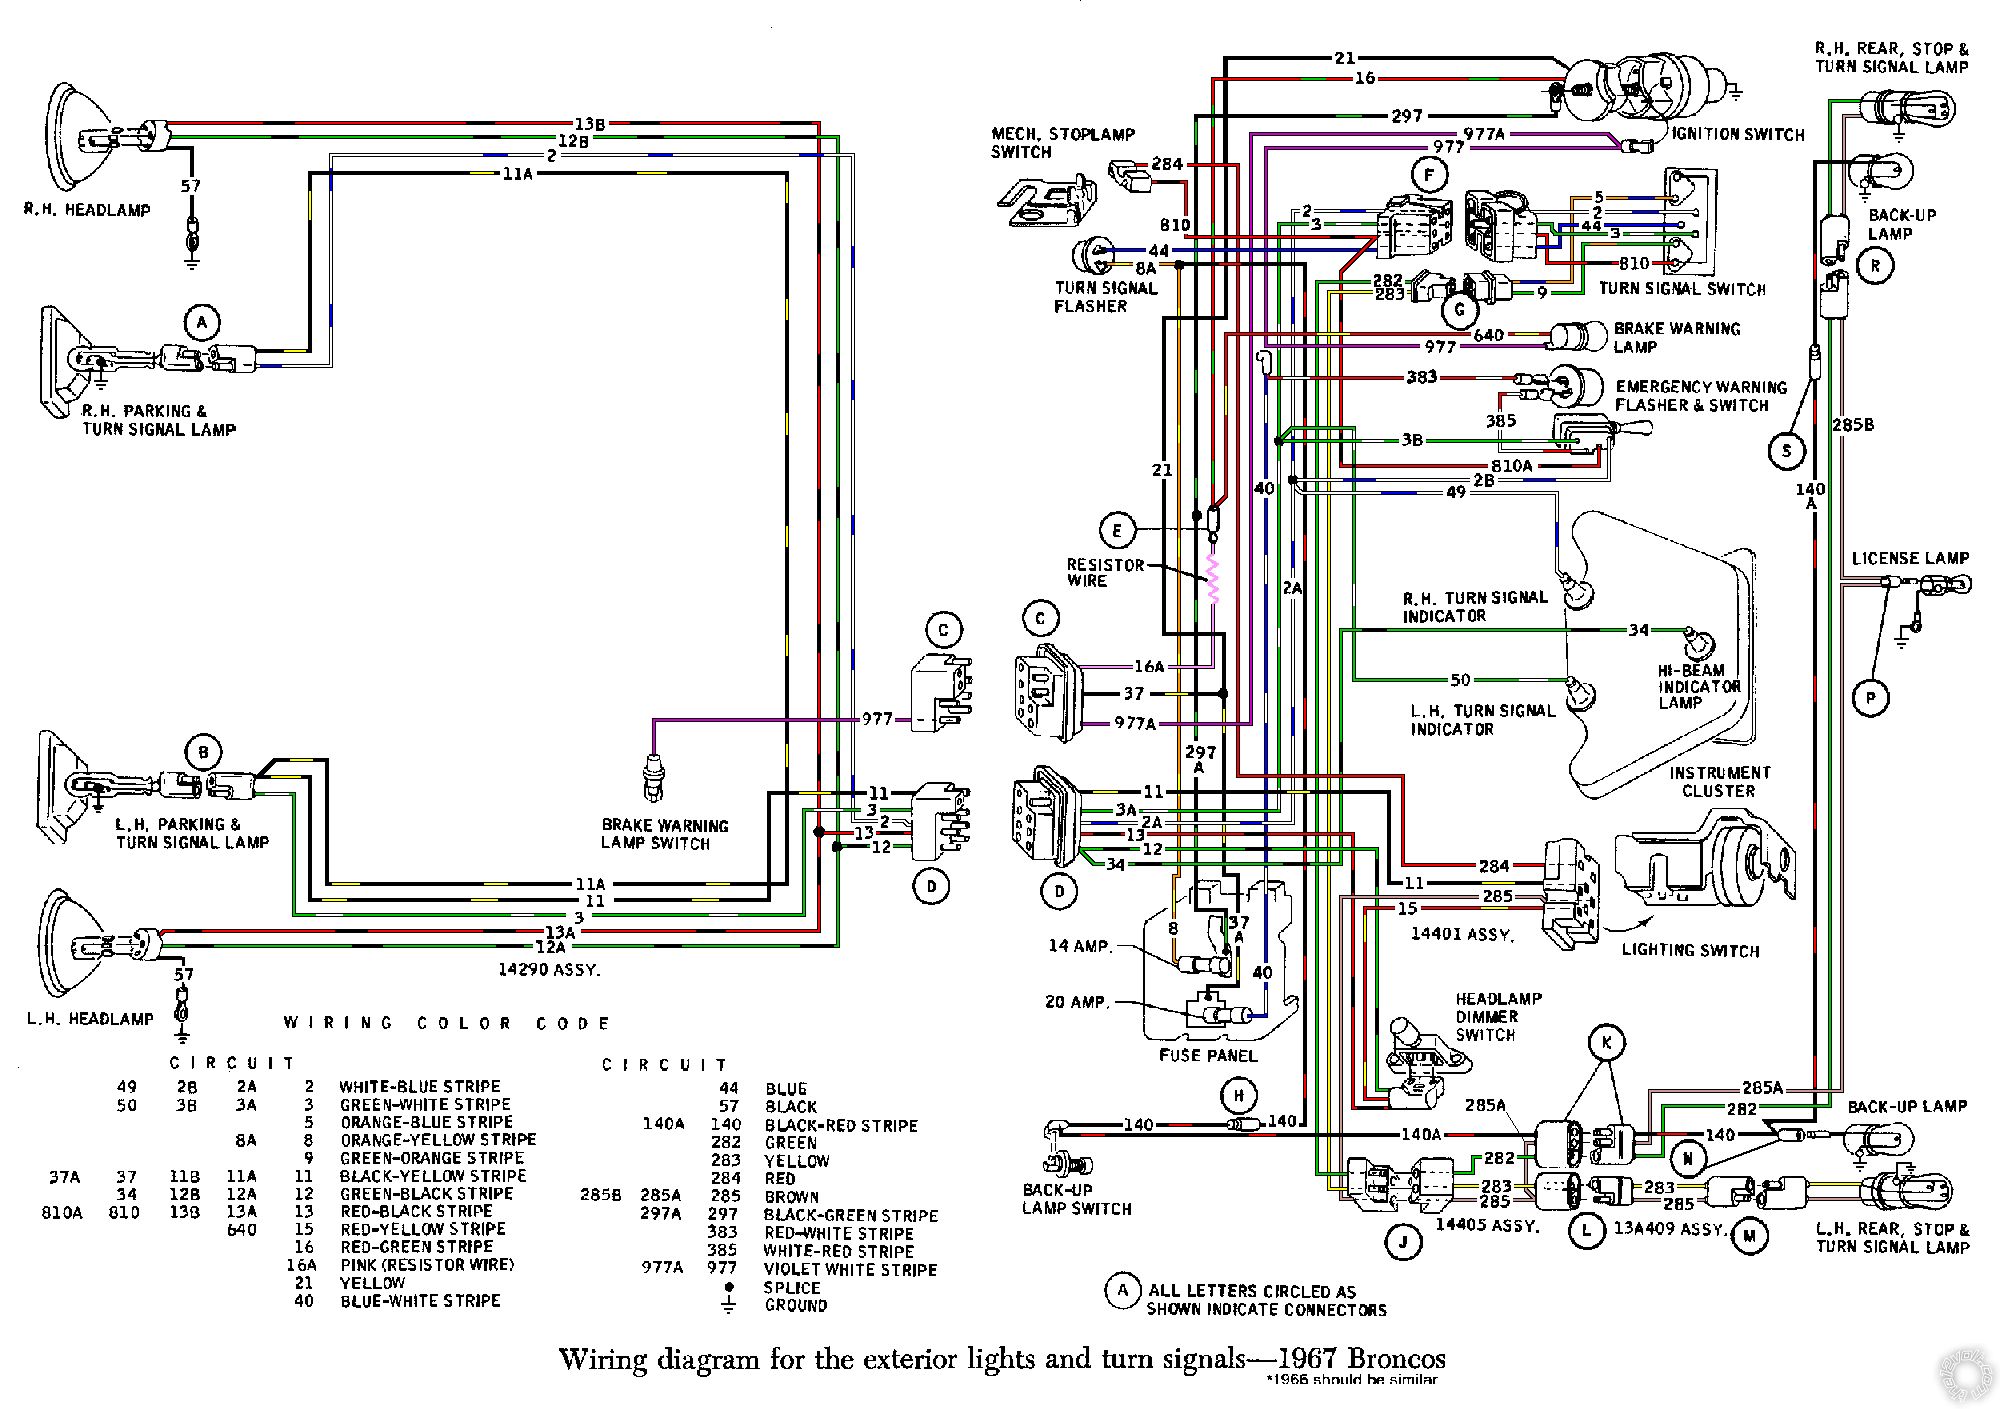 Wiring Diagram For Ford F250 Truck - Wiring Diagram